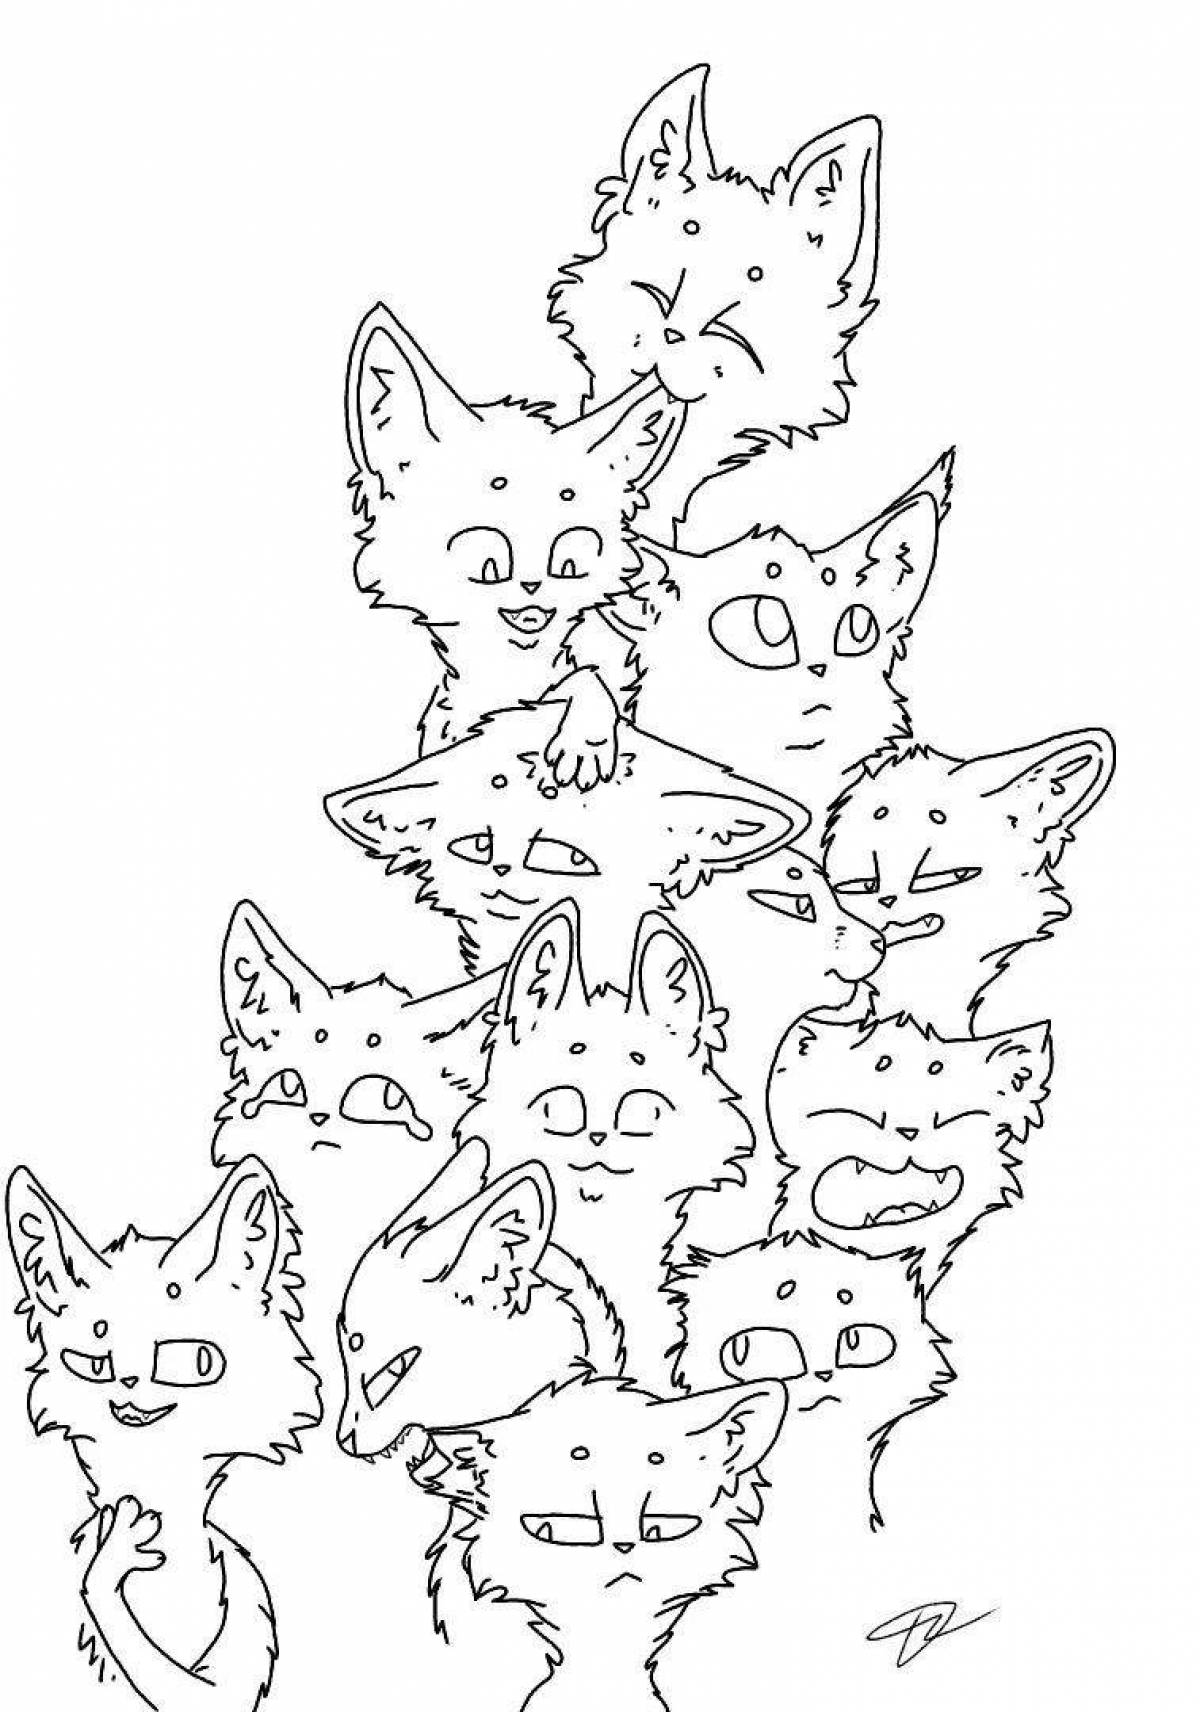 Great coloring page with lots of cats